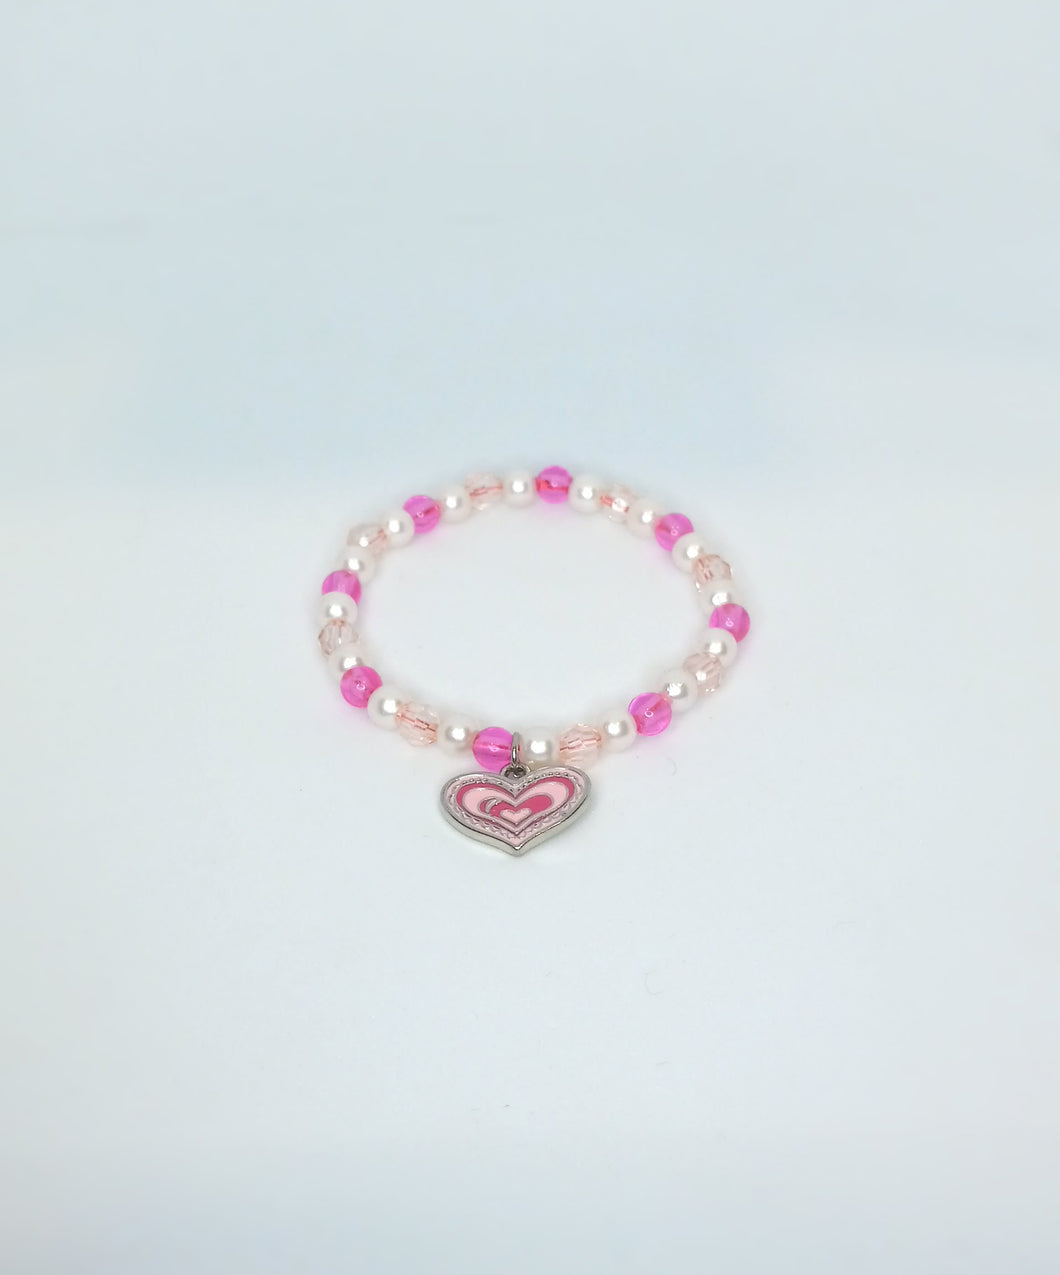 Pink, White, and Pearl Bead Bracelet